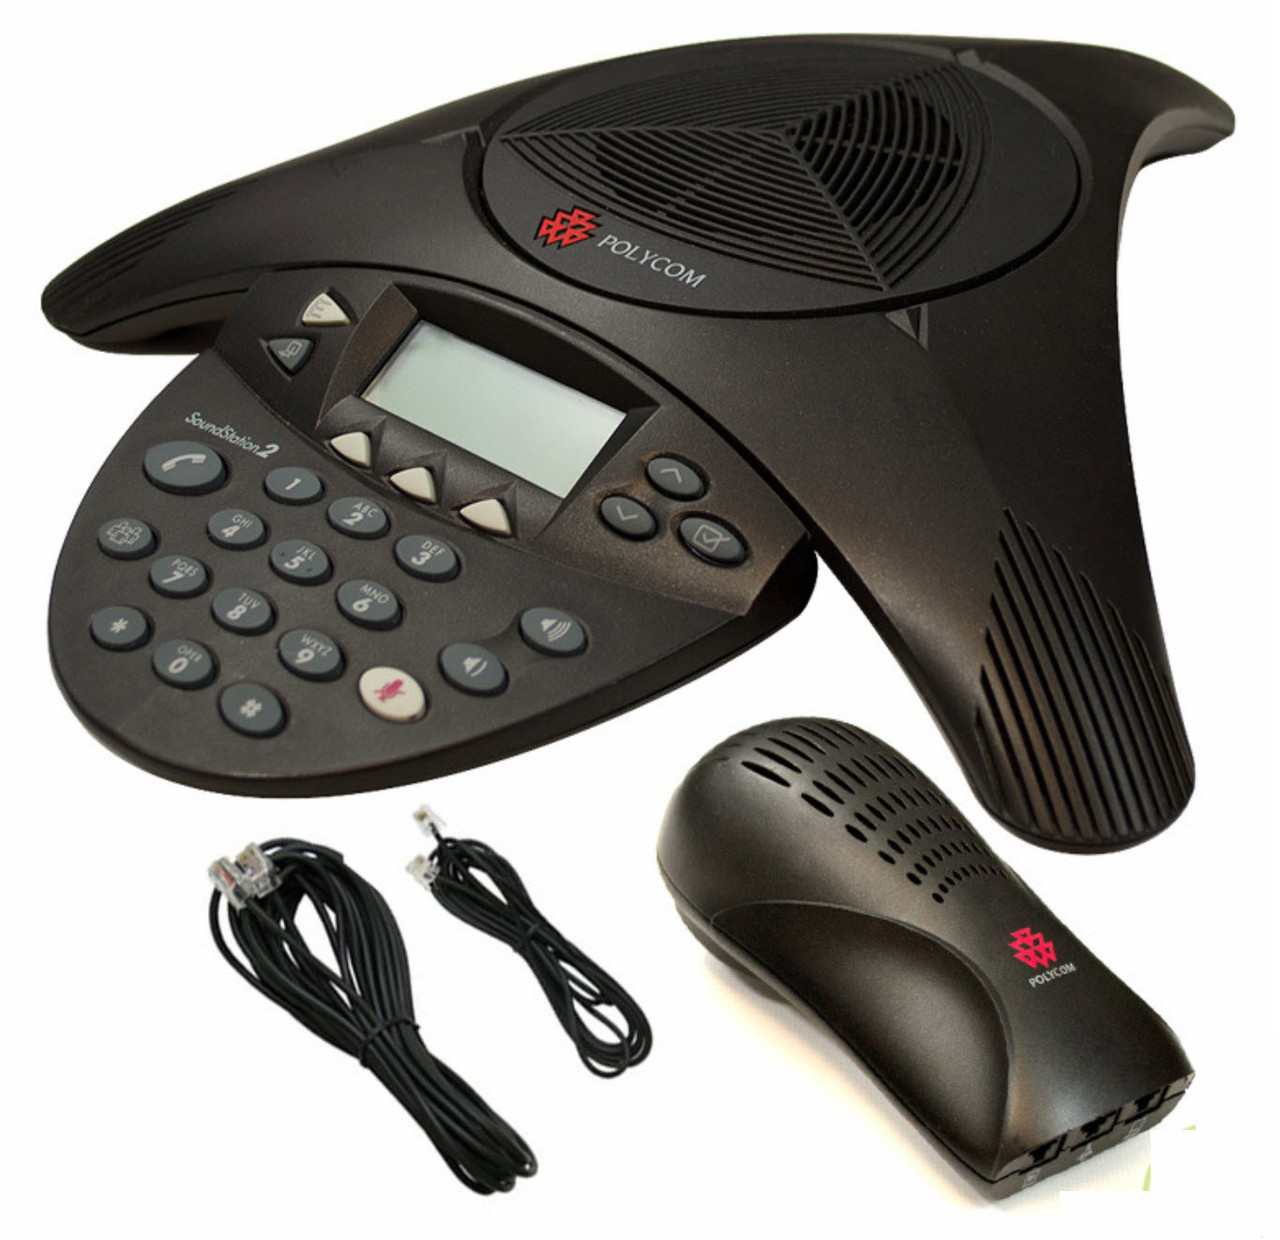 Polycom SoundStation 2w Conference Phone No Accessories for sale online 